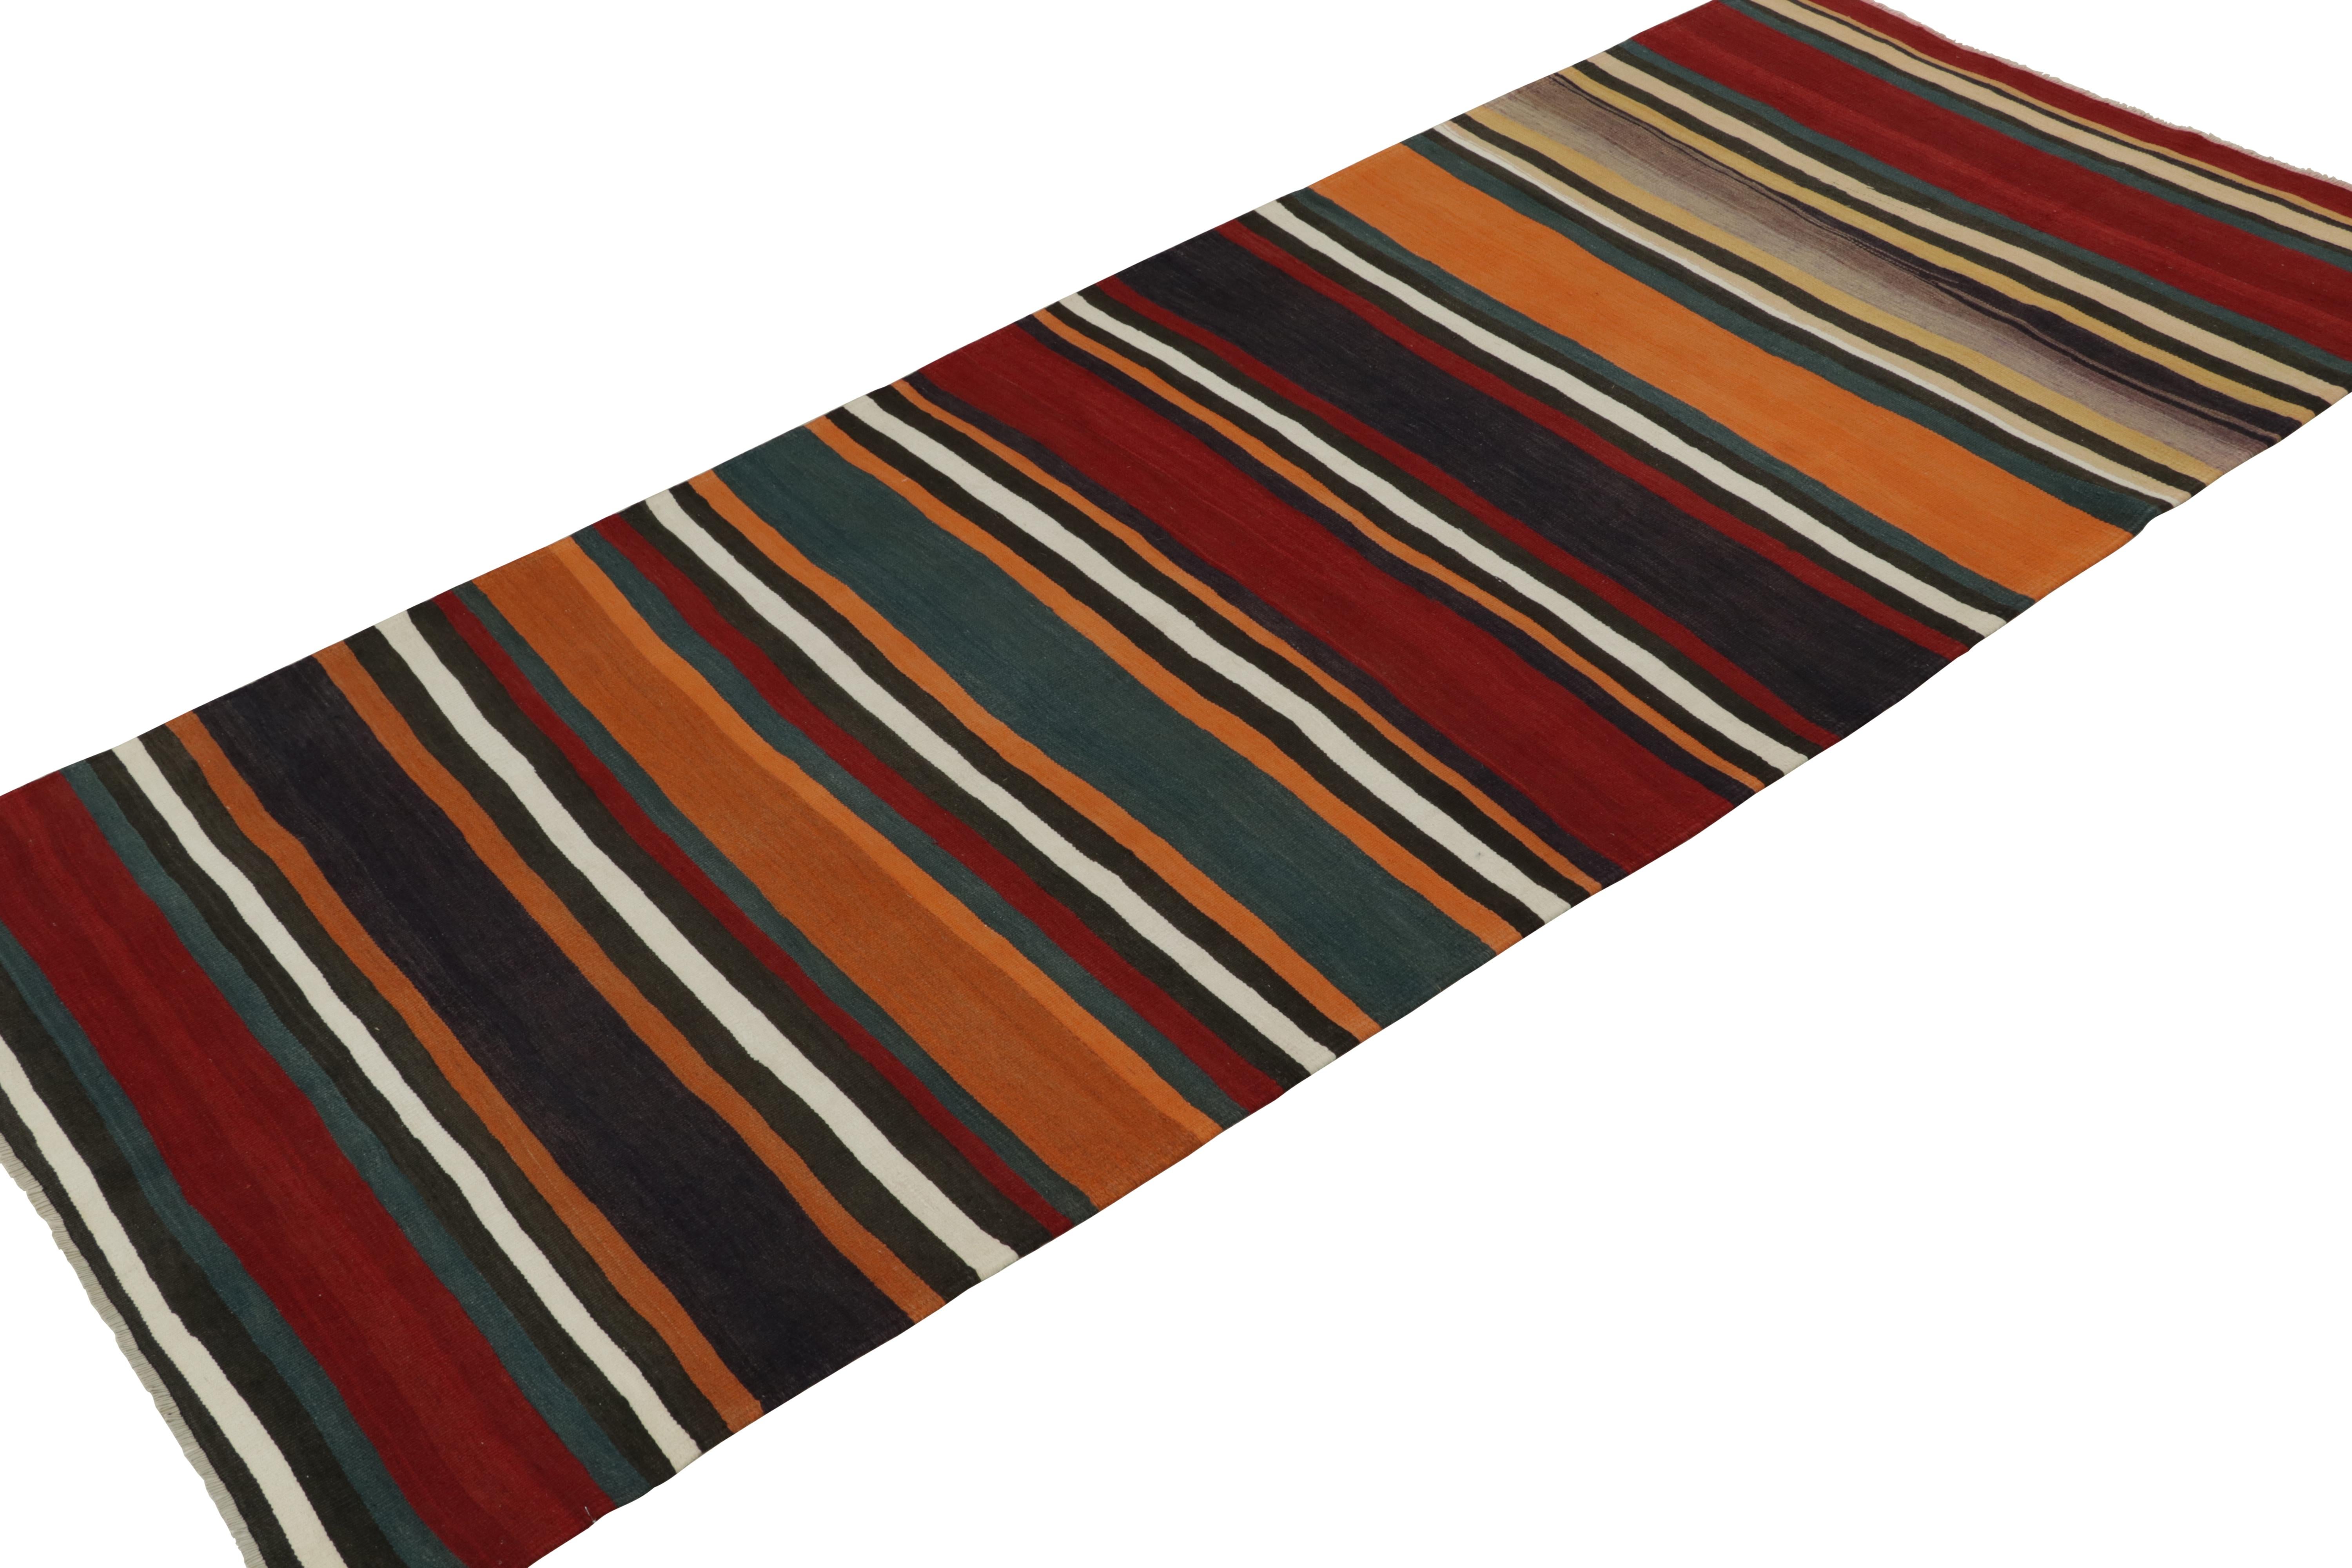 This vintage 5x10 Persian Kilim is a new addition of Bidjar provenance in Rug & Kilim's rare tribal curations. Handwoven in wool, it originates circa 1940-1950.

Further on the Design: 

Bidjar Kilims like this are reputed for their durability